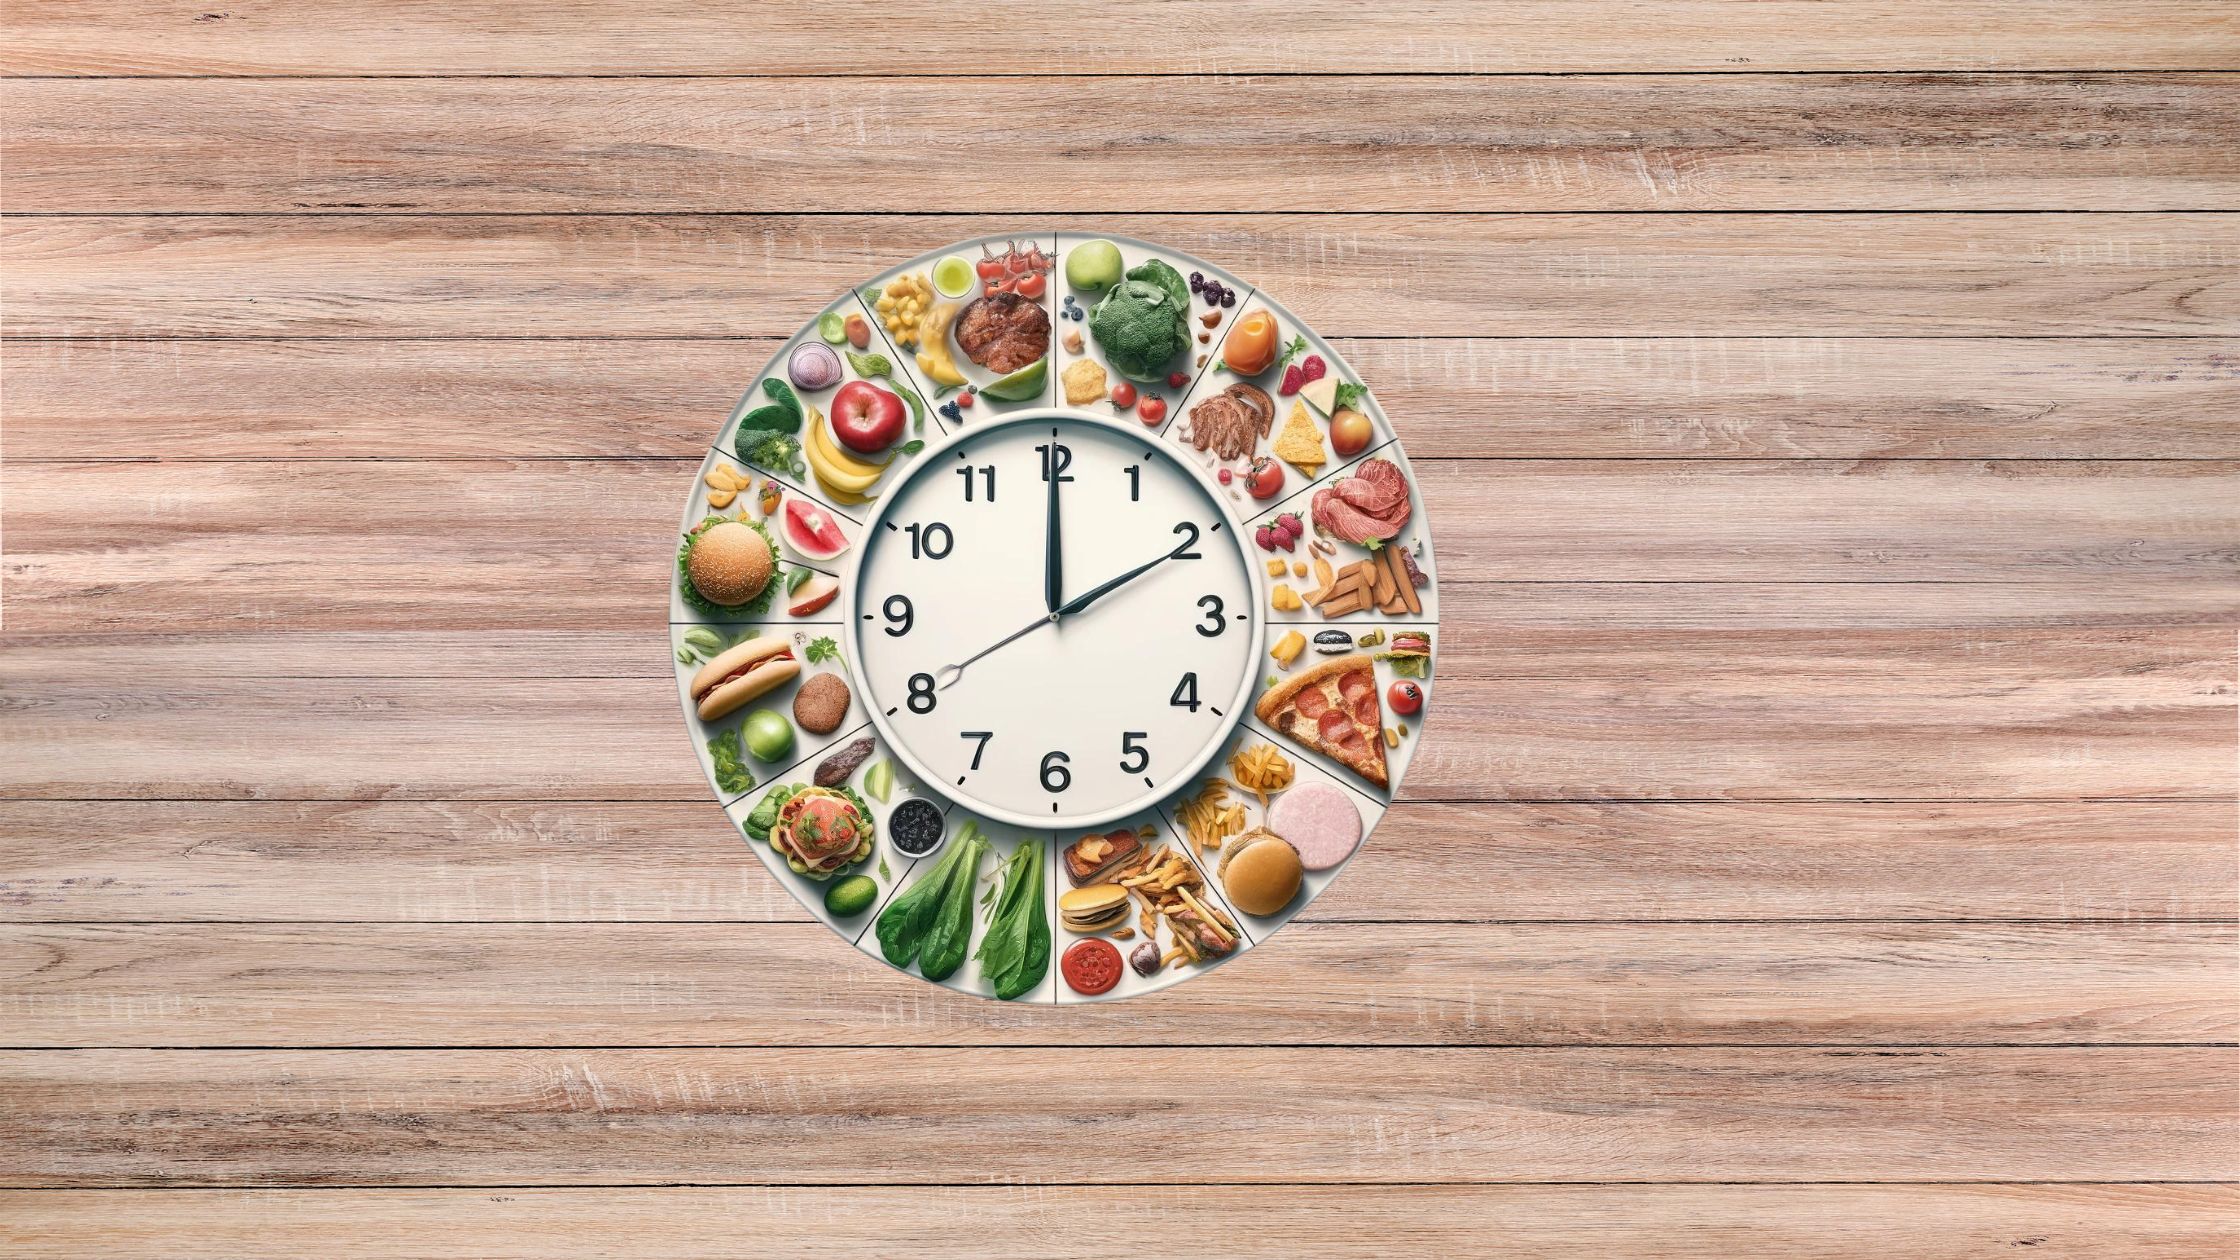 5 Quick Tips to Start Your Successful Intermittent Fasting Journey